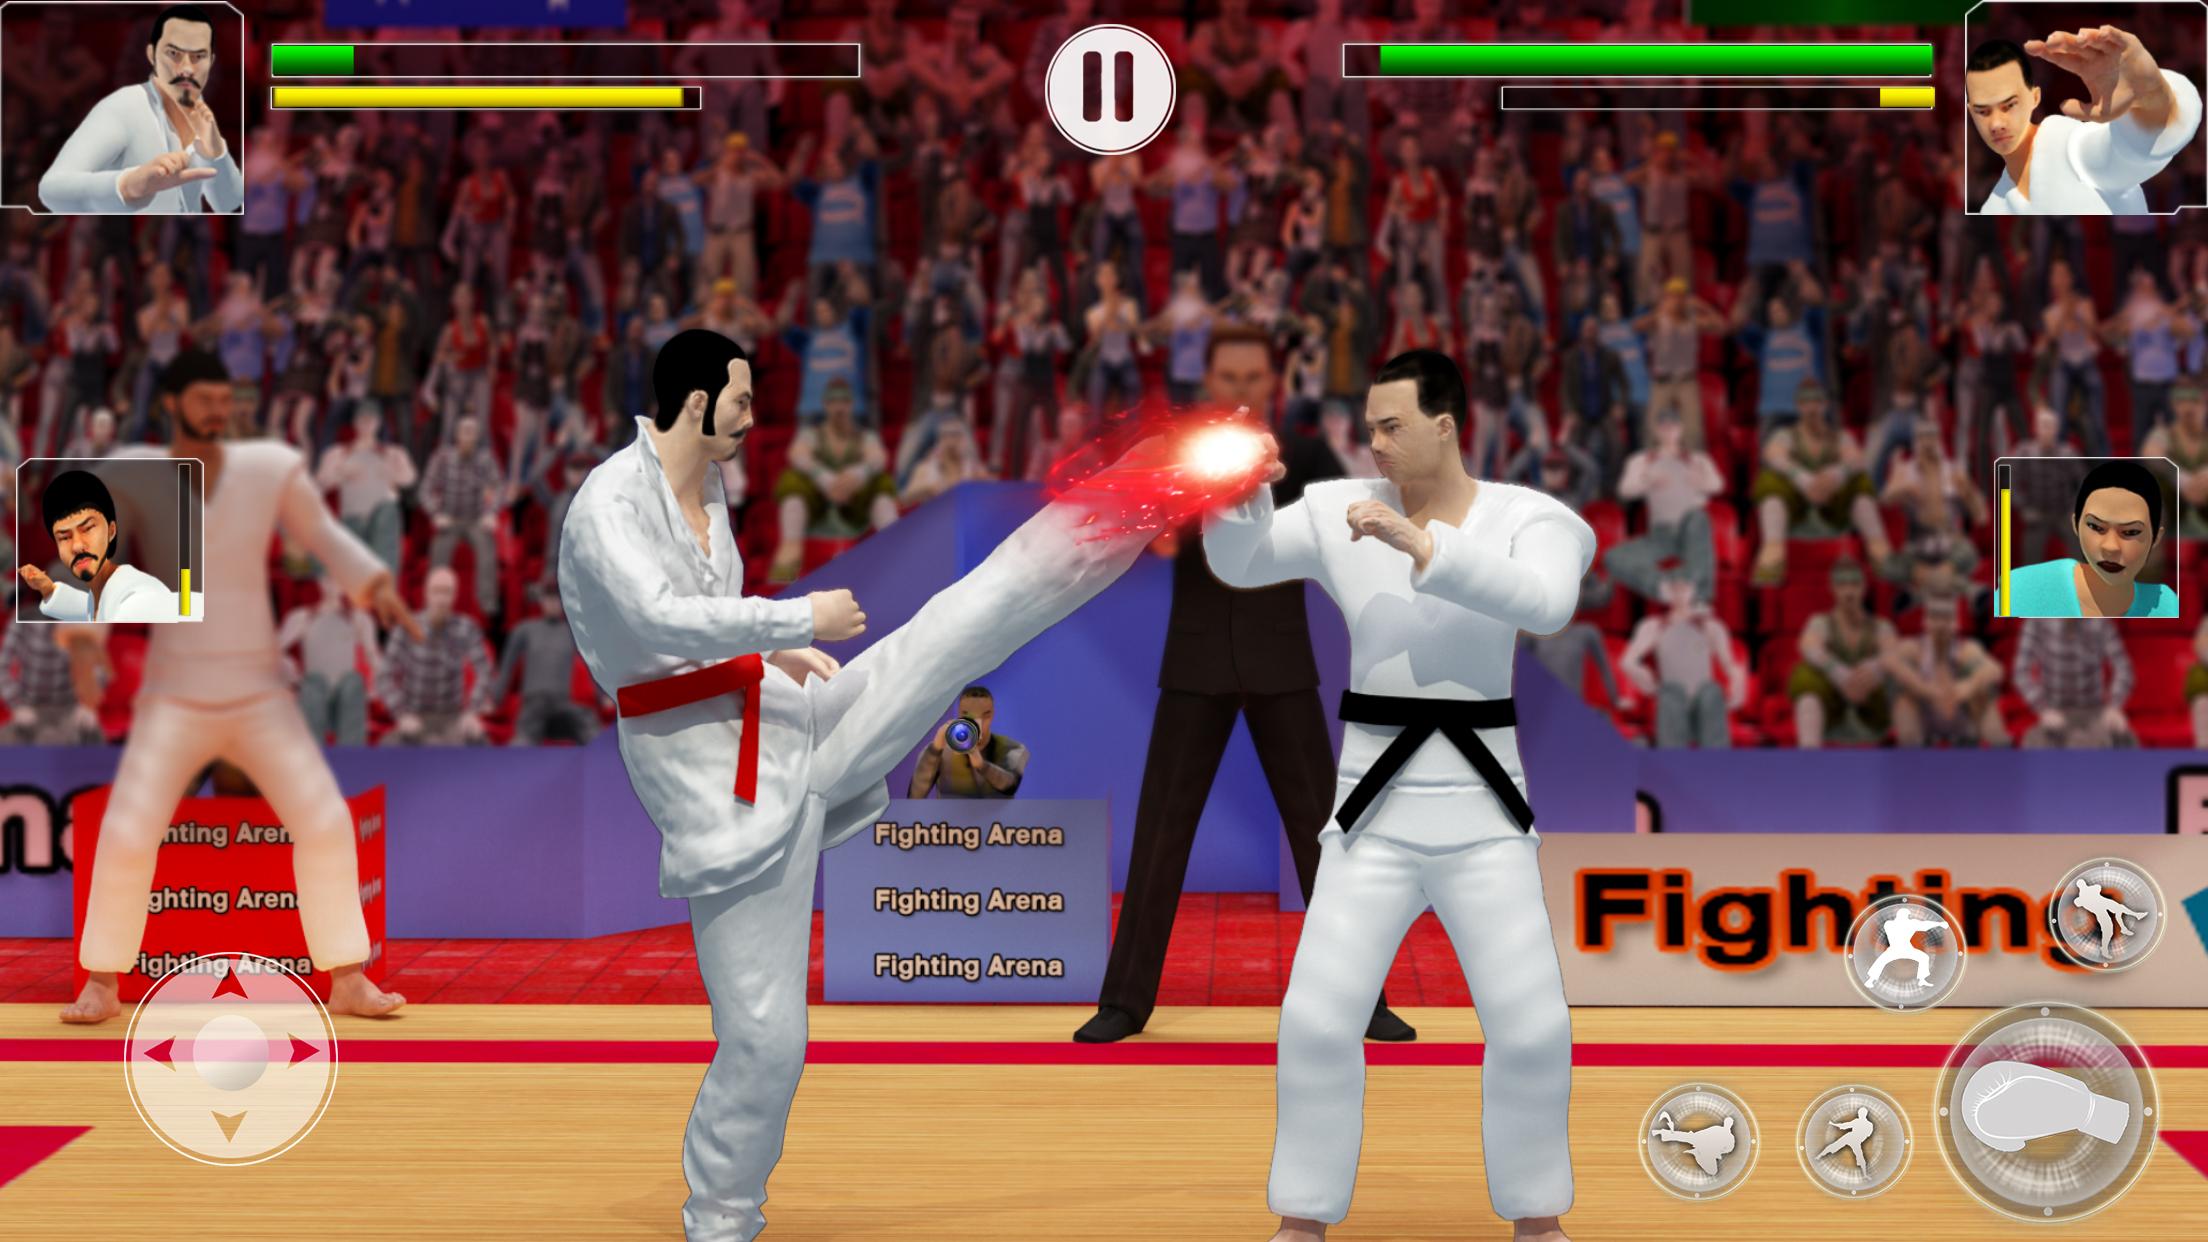 Play Karate Fighter: Fighting Games Online